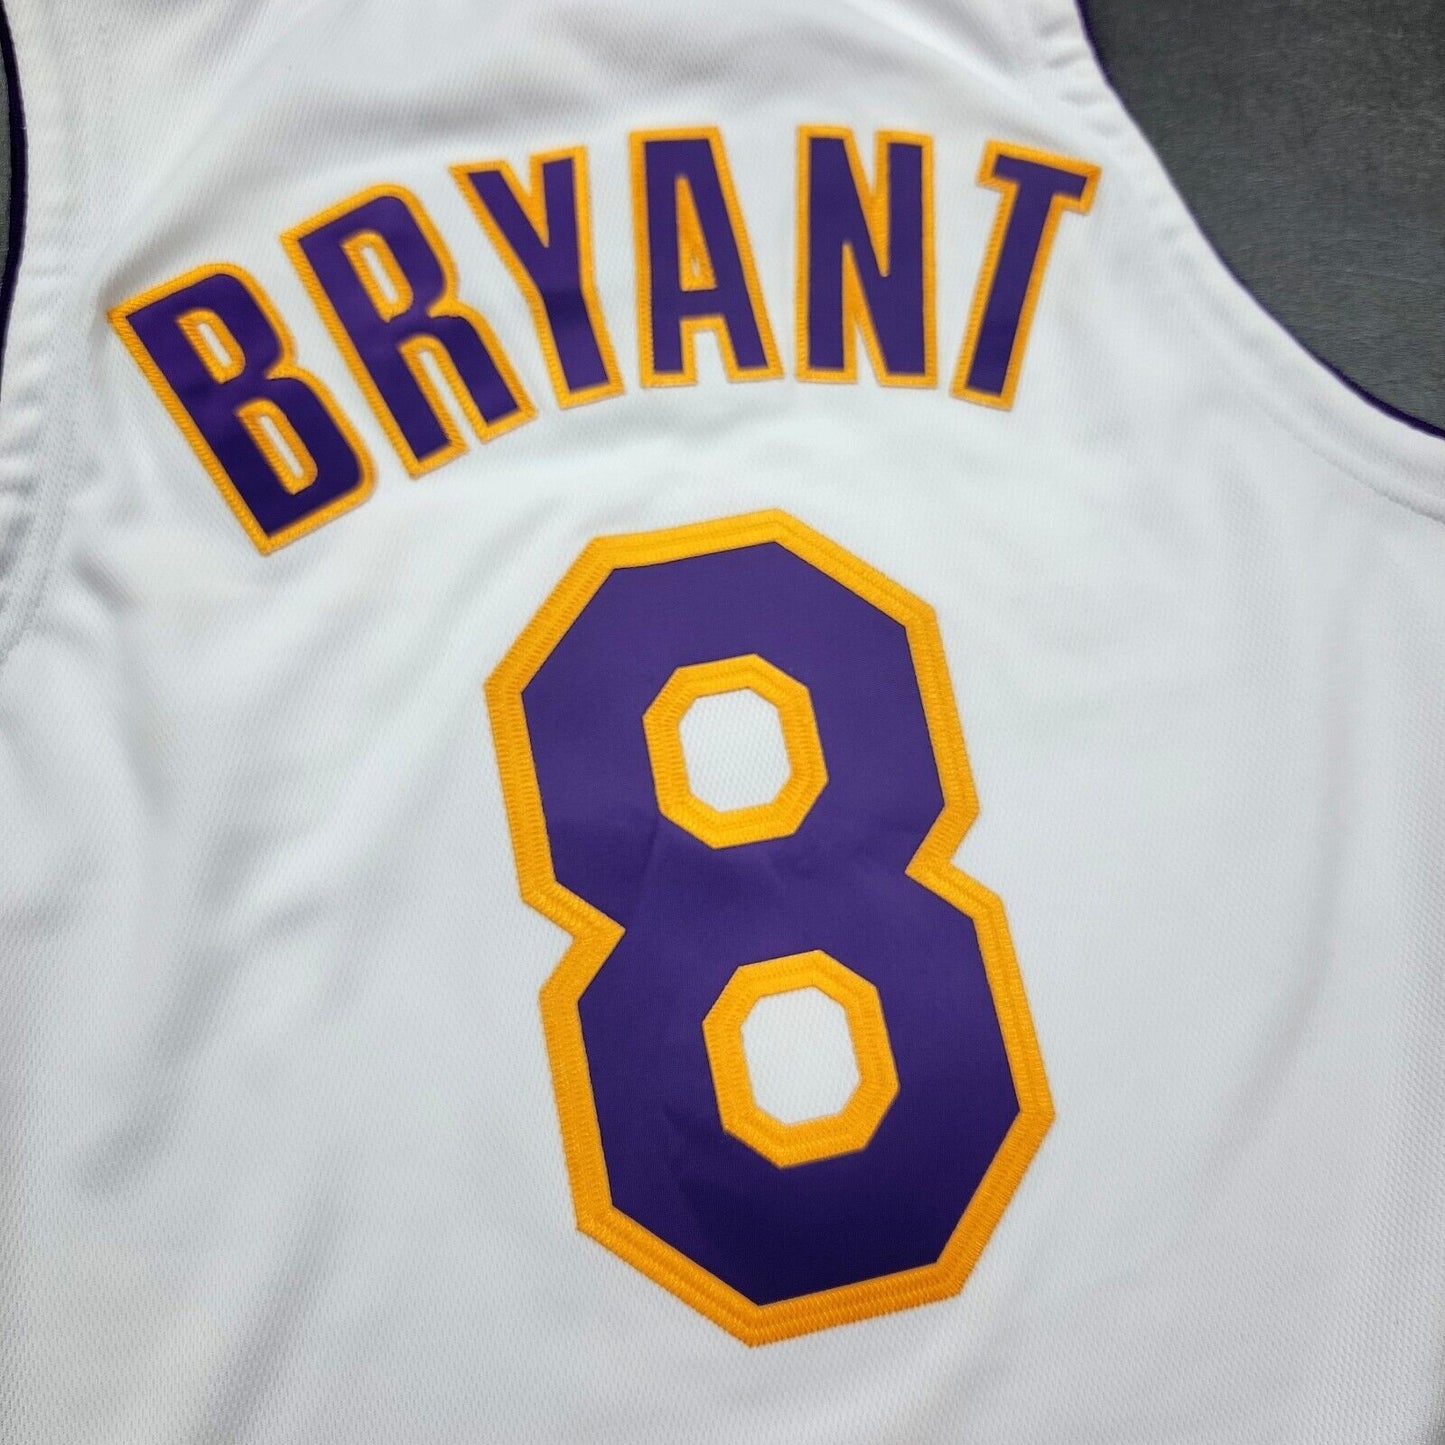 100% Authentic Kobe Bryant Mitchell & Ness 03 04 Lakers Jersey Size 44 L Mens